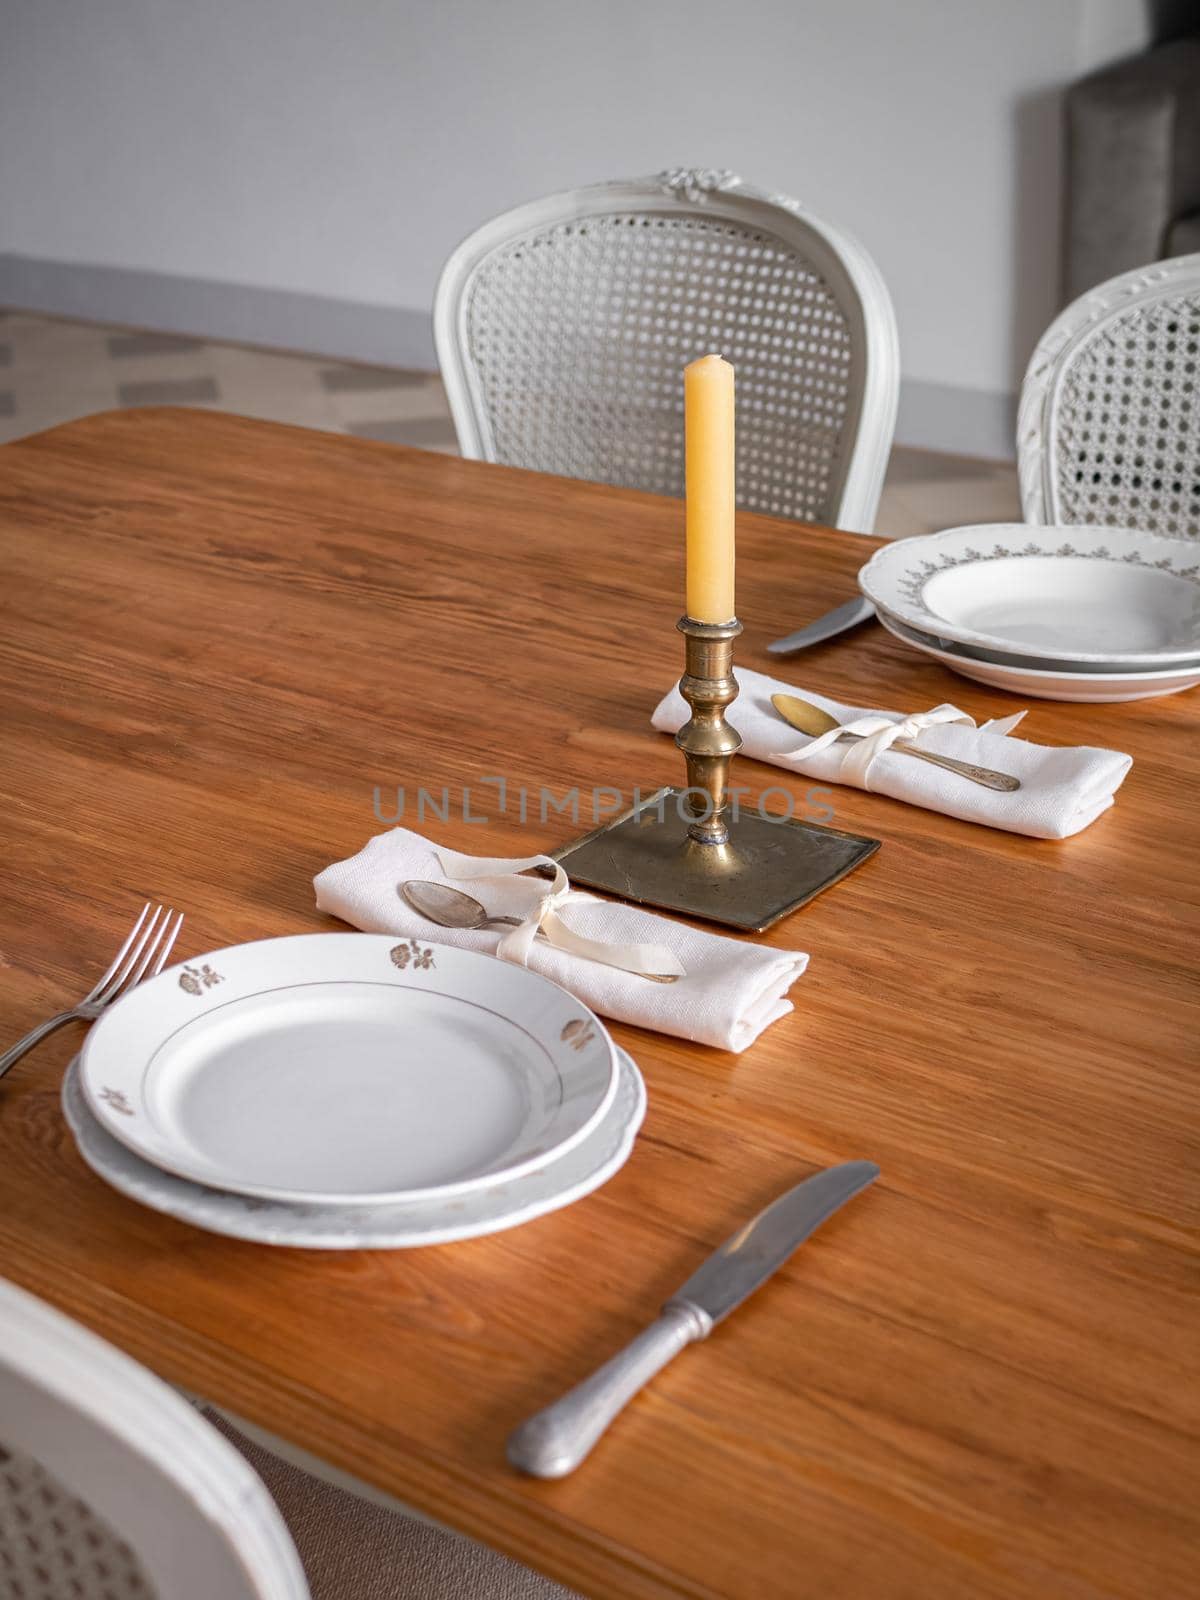 Wooden table setting for two persons, with plates, cutlery and old candlestick with candle. Interior of living room decorated in vintage style. Selective focus.